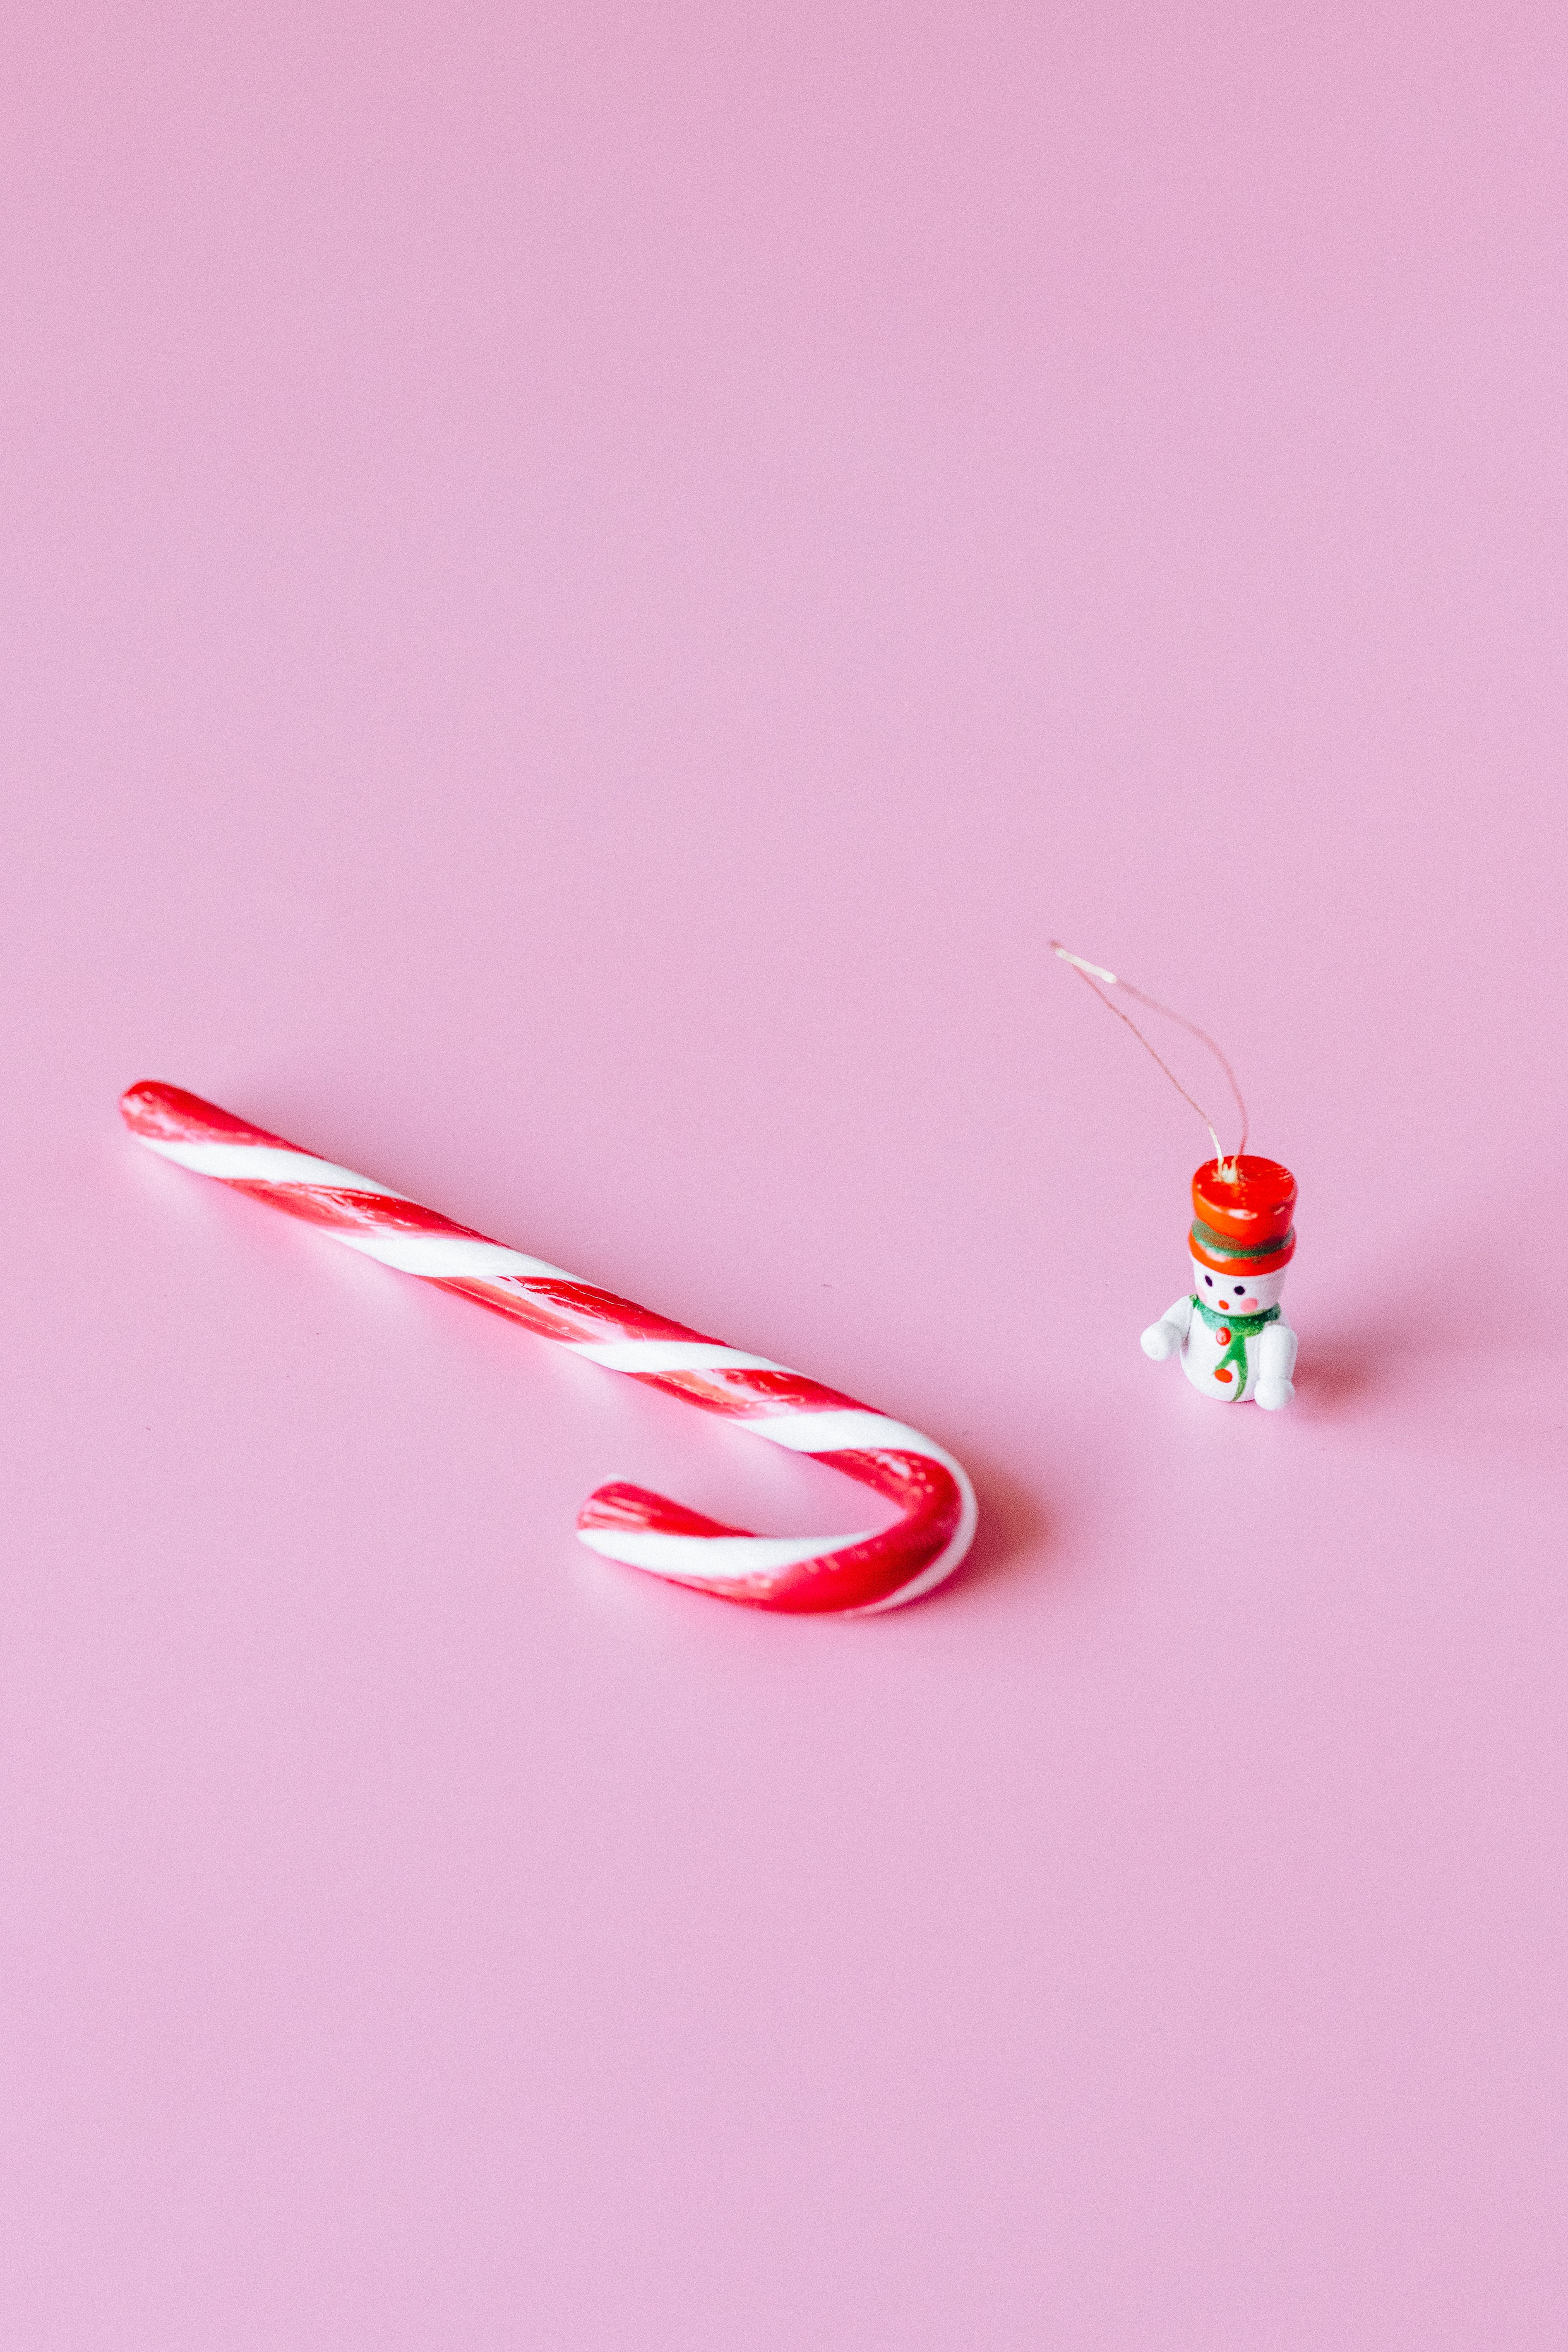 Red and White Candy Cane · Free